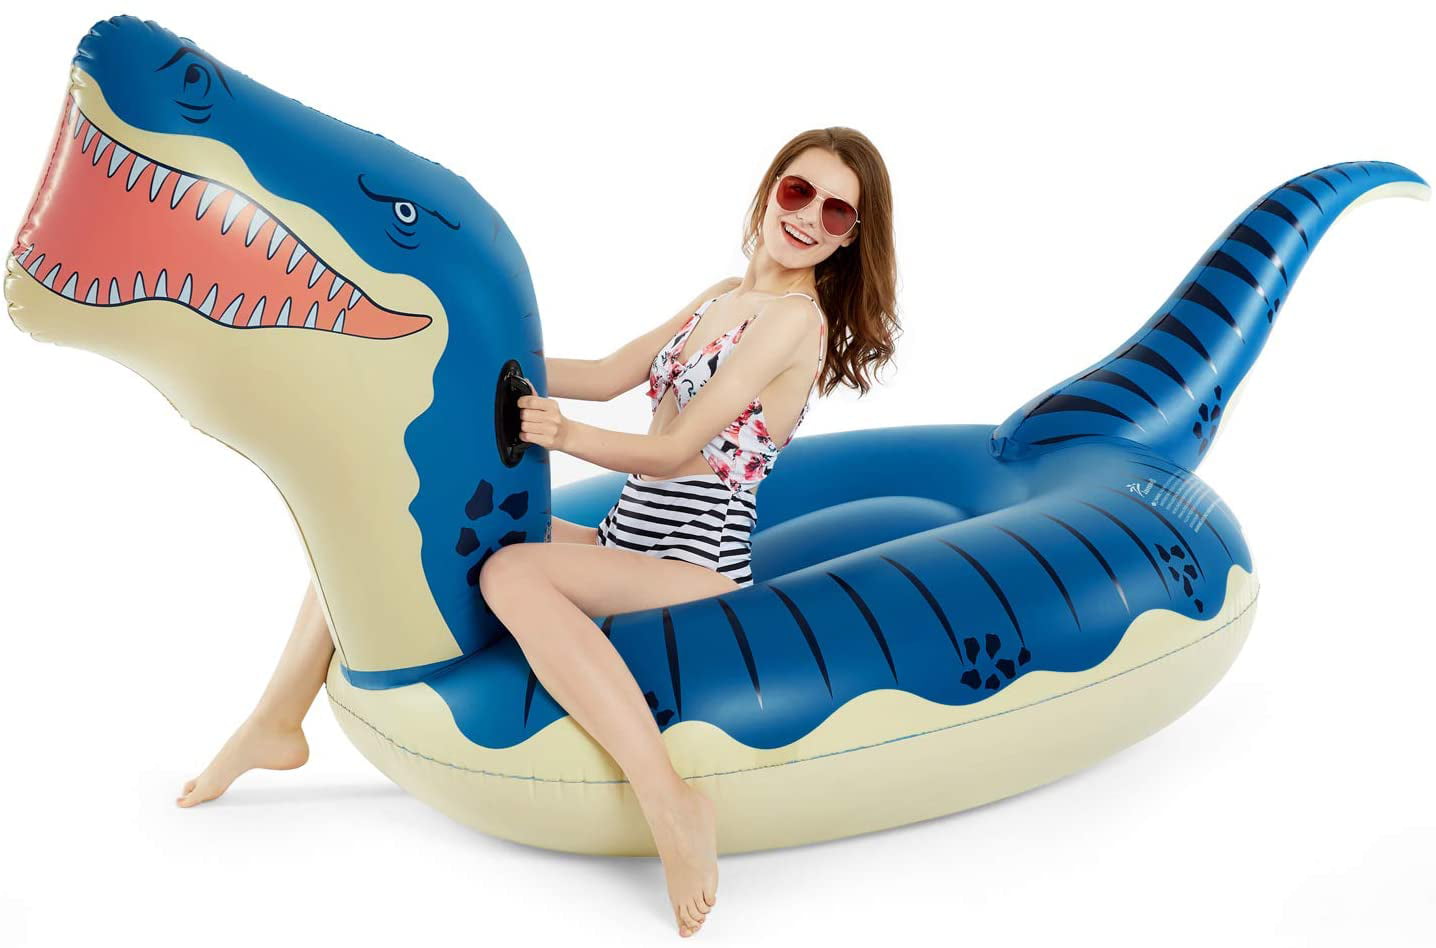 Details about   Inflatable Giant Swim Pool Floats Swimming Fun Water Sports Beach Kids Toy d/ x 